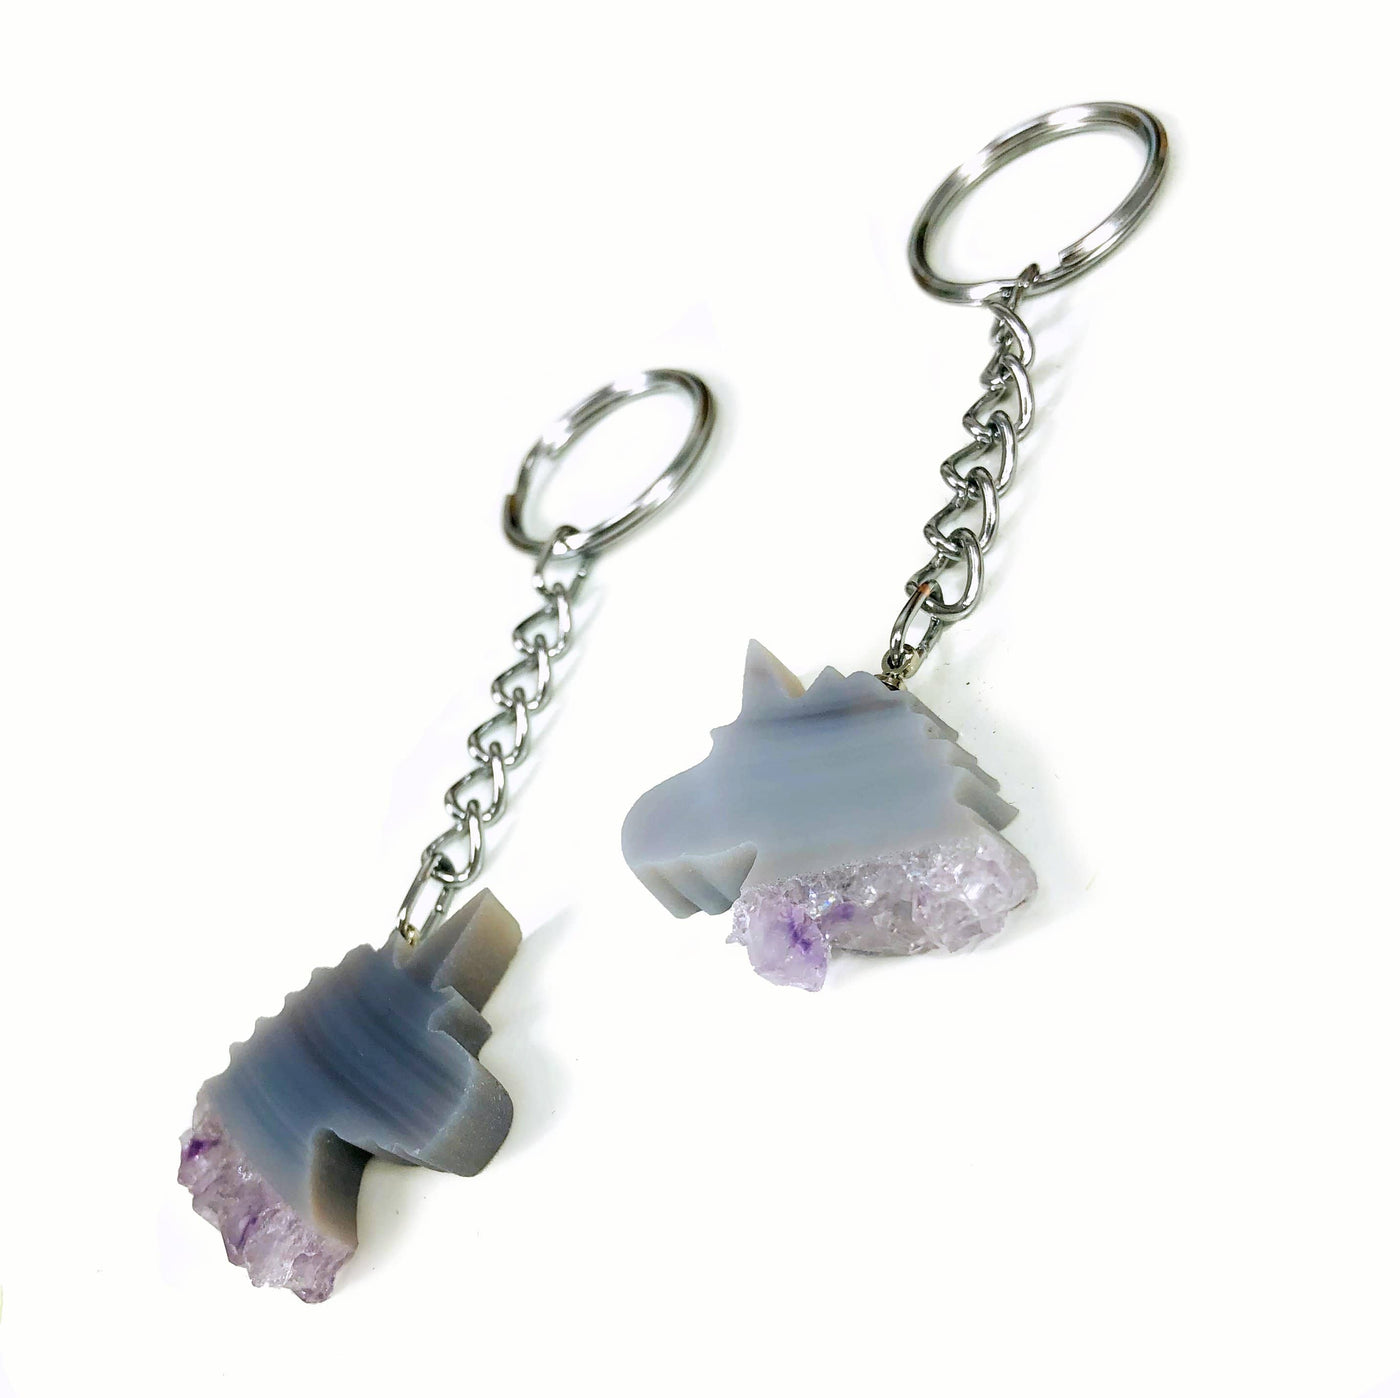 Agate Unicorn keychains being displayed on a white background.